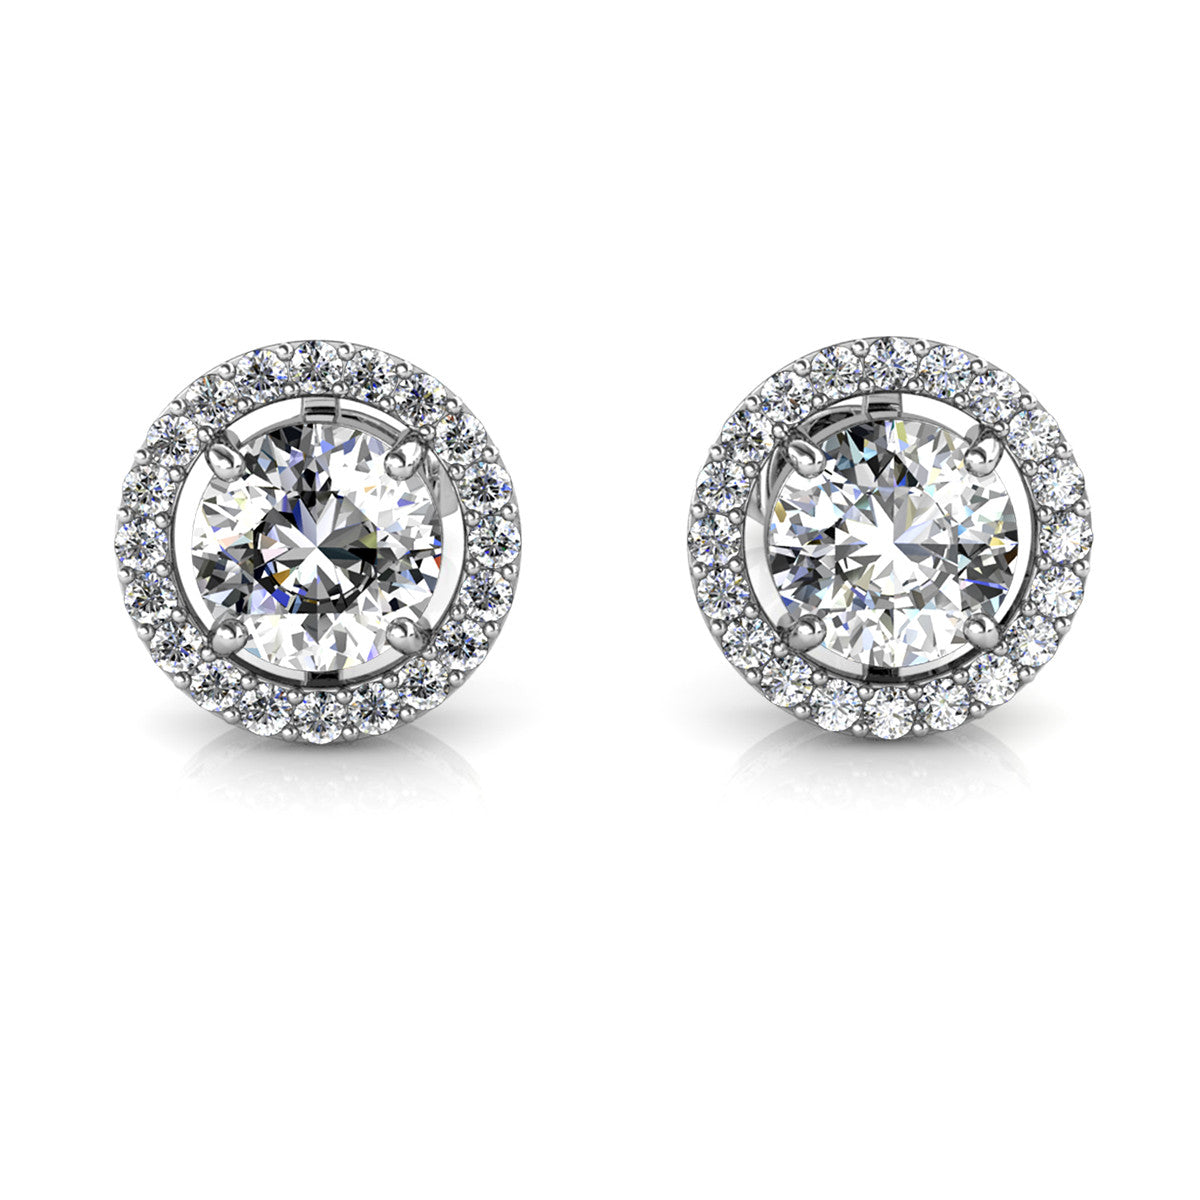 Moissanite by Cate & Chloe Kailani Sterling Silver Stud Earrings with Moissanite Crystals